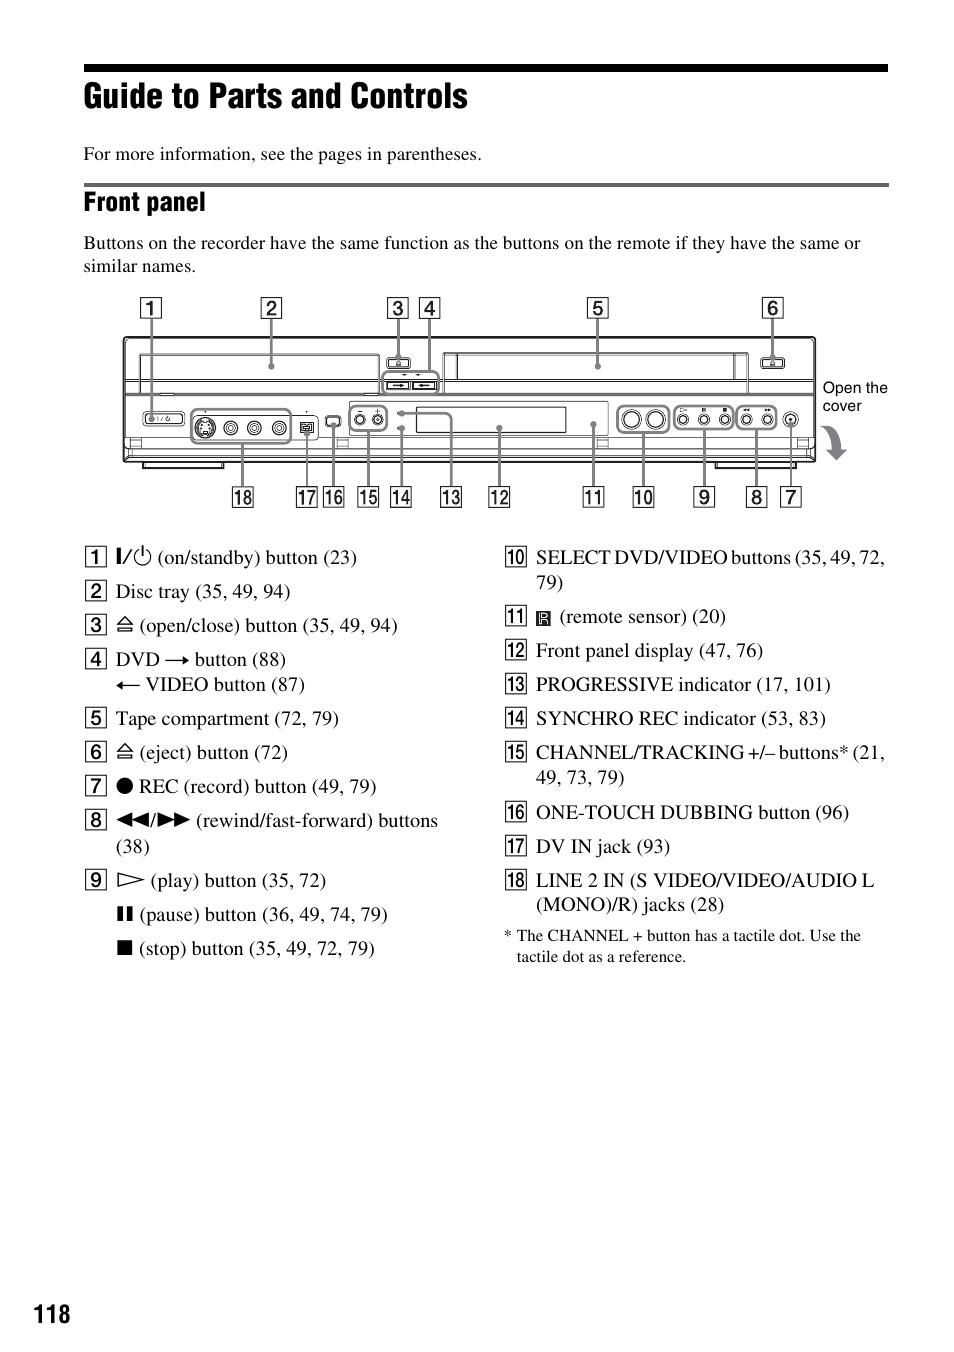 Guide to parts and controls, Front panel | Sony RDR-VX521 User Manual | Page 118 / 132